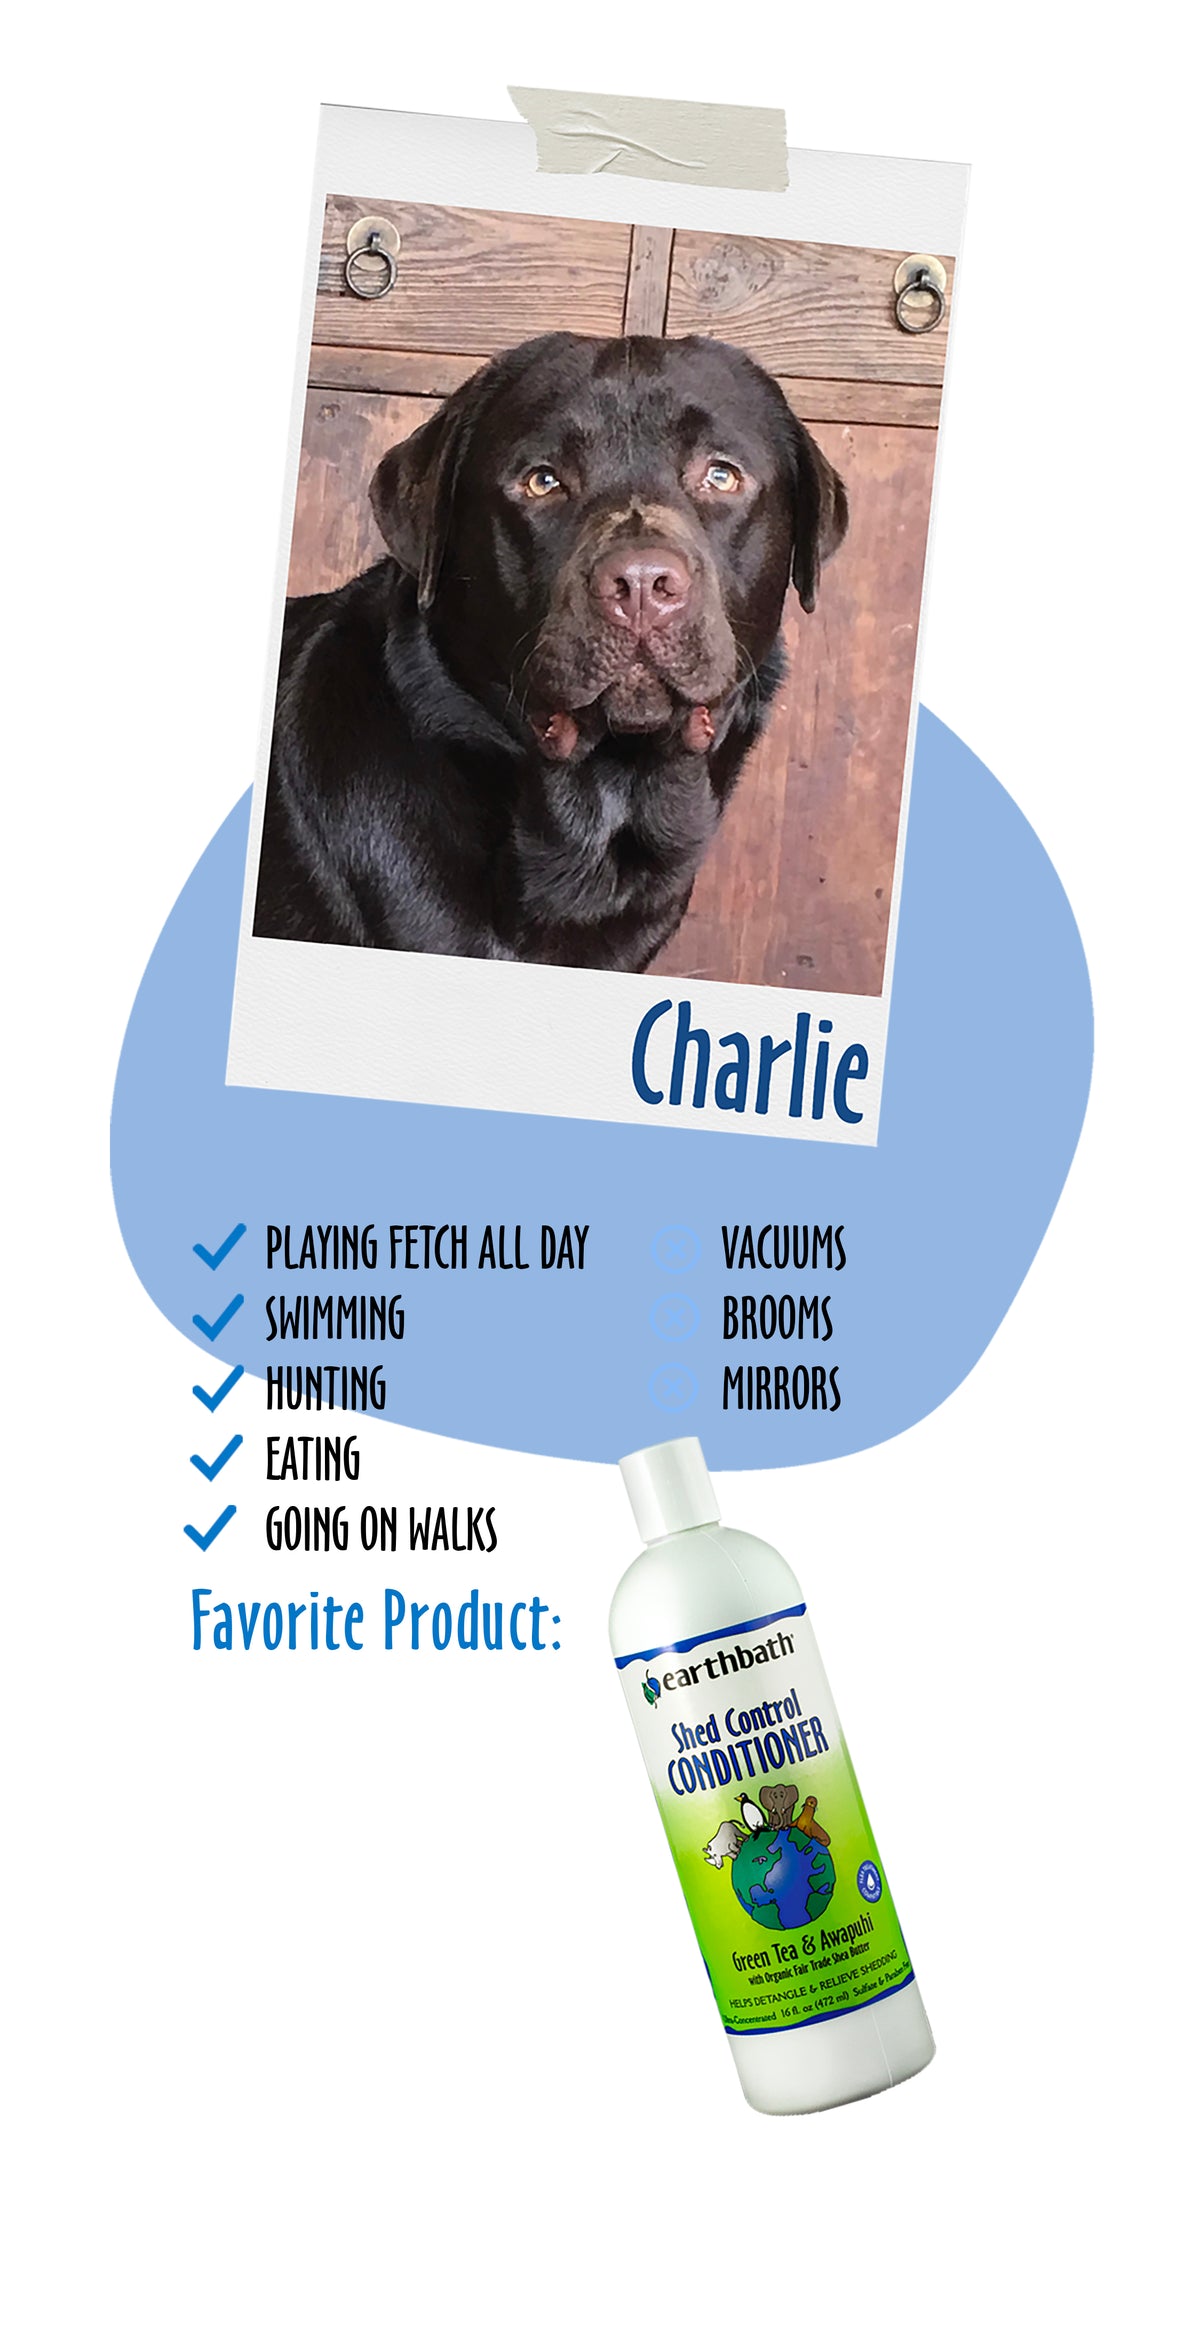 Charlies loves Shed Control Conditioner